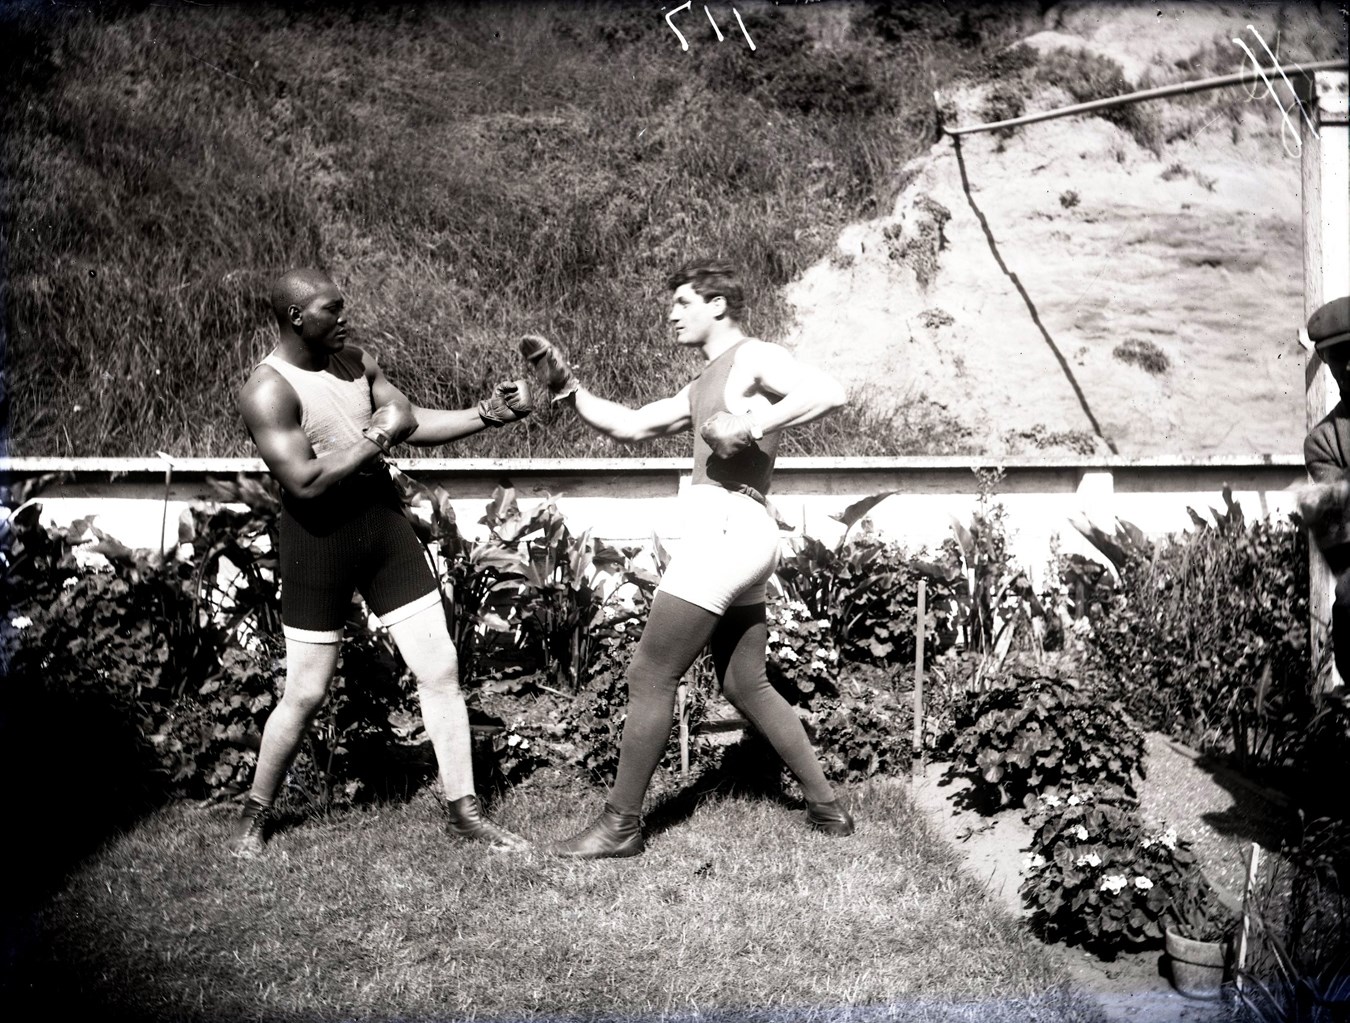 Dana Collection Of Important Boxing Negatives - 1909 Jack Johnson Spars w/Jewish Boxer Al Kaufman "Outside in Garden Setting" Type I Glass Plate Negative by Dana Studios